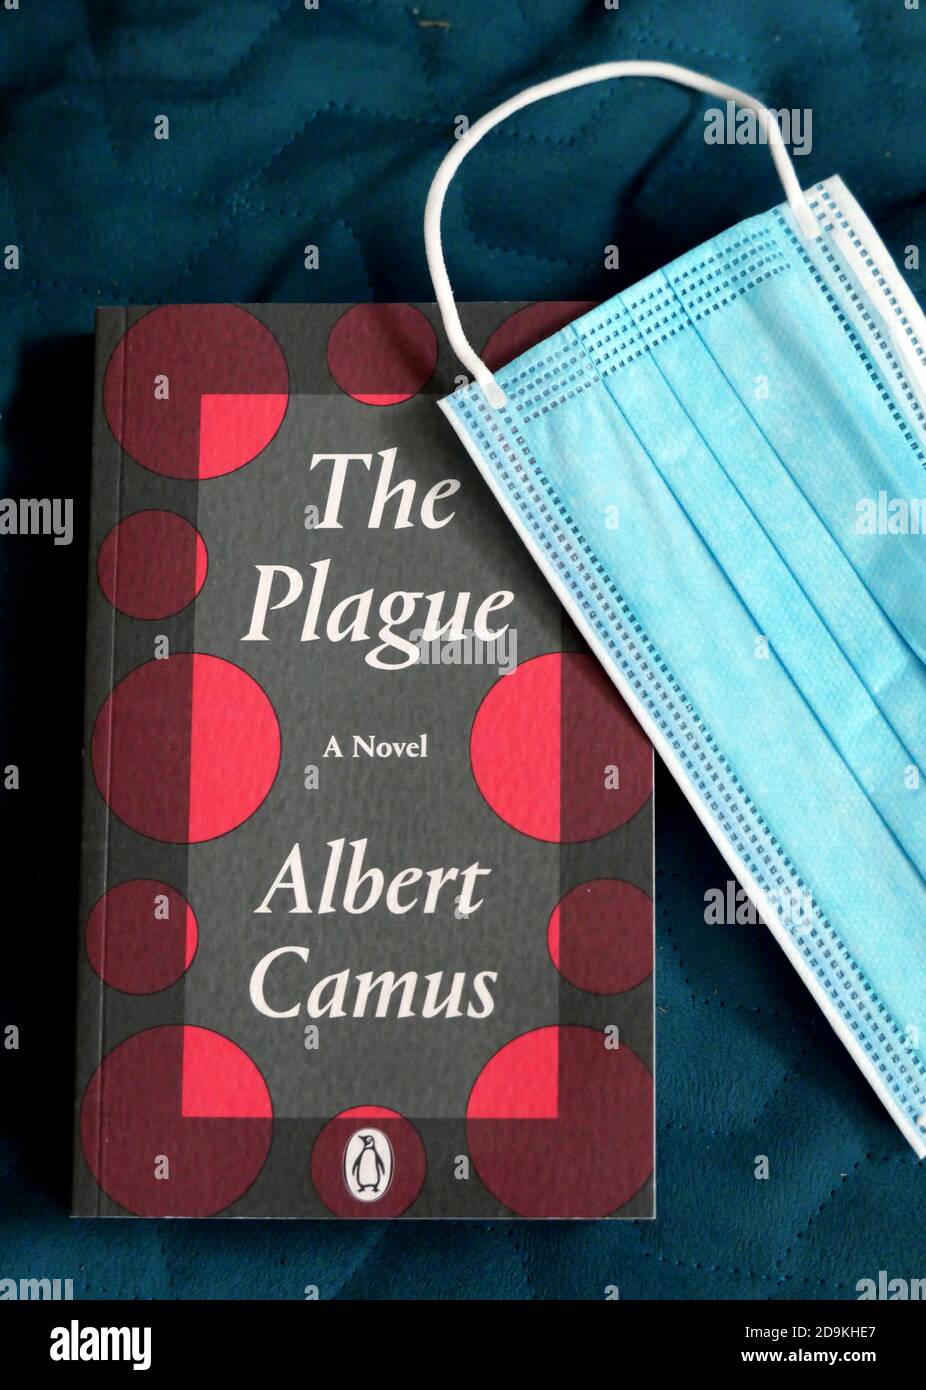 The Plaque, a novel by Albert Camus, has been selling strongly during the current pandemic. Stock Photo